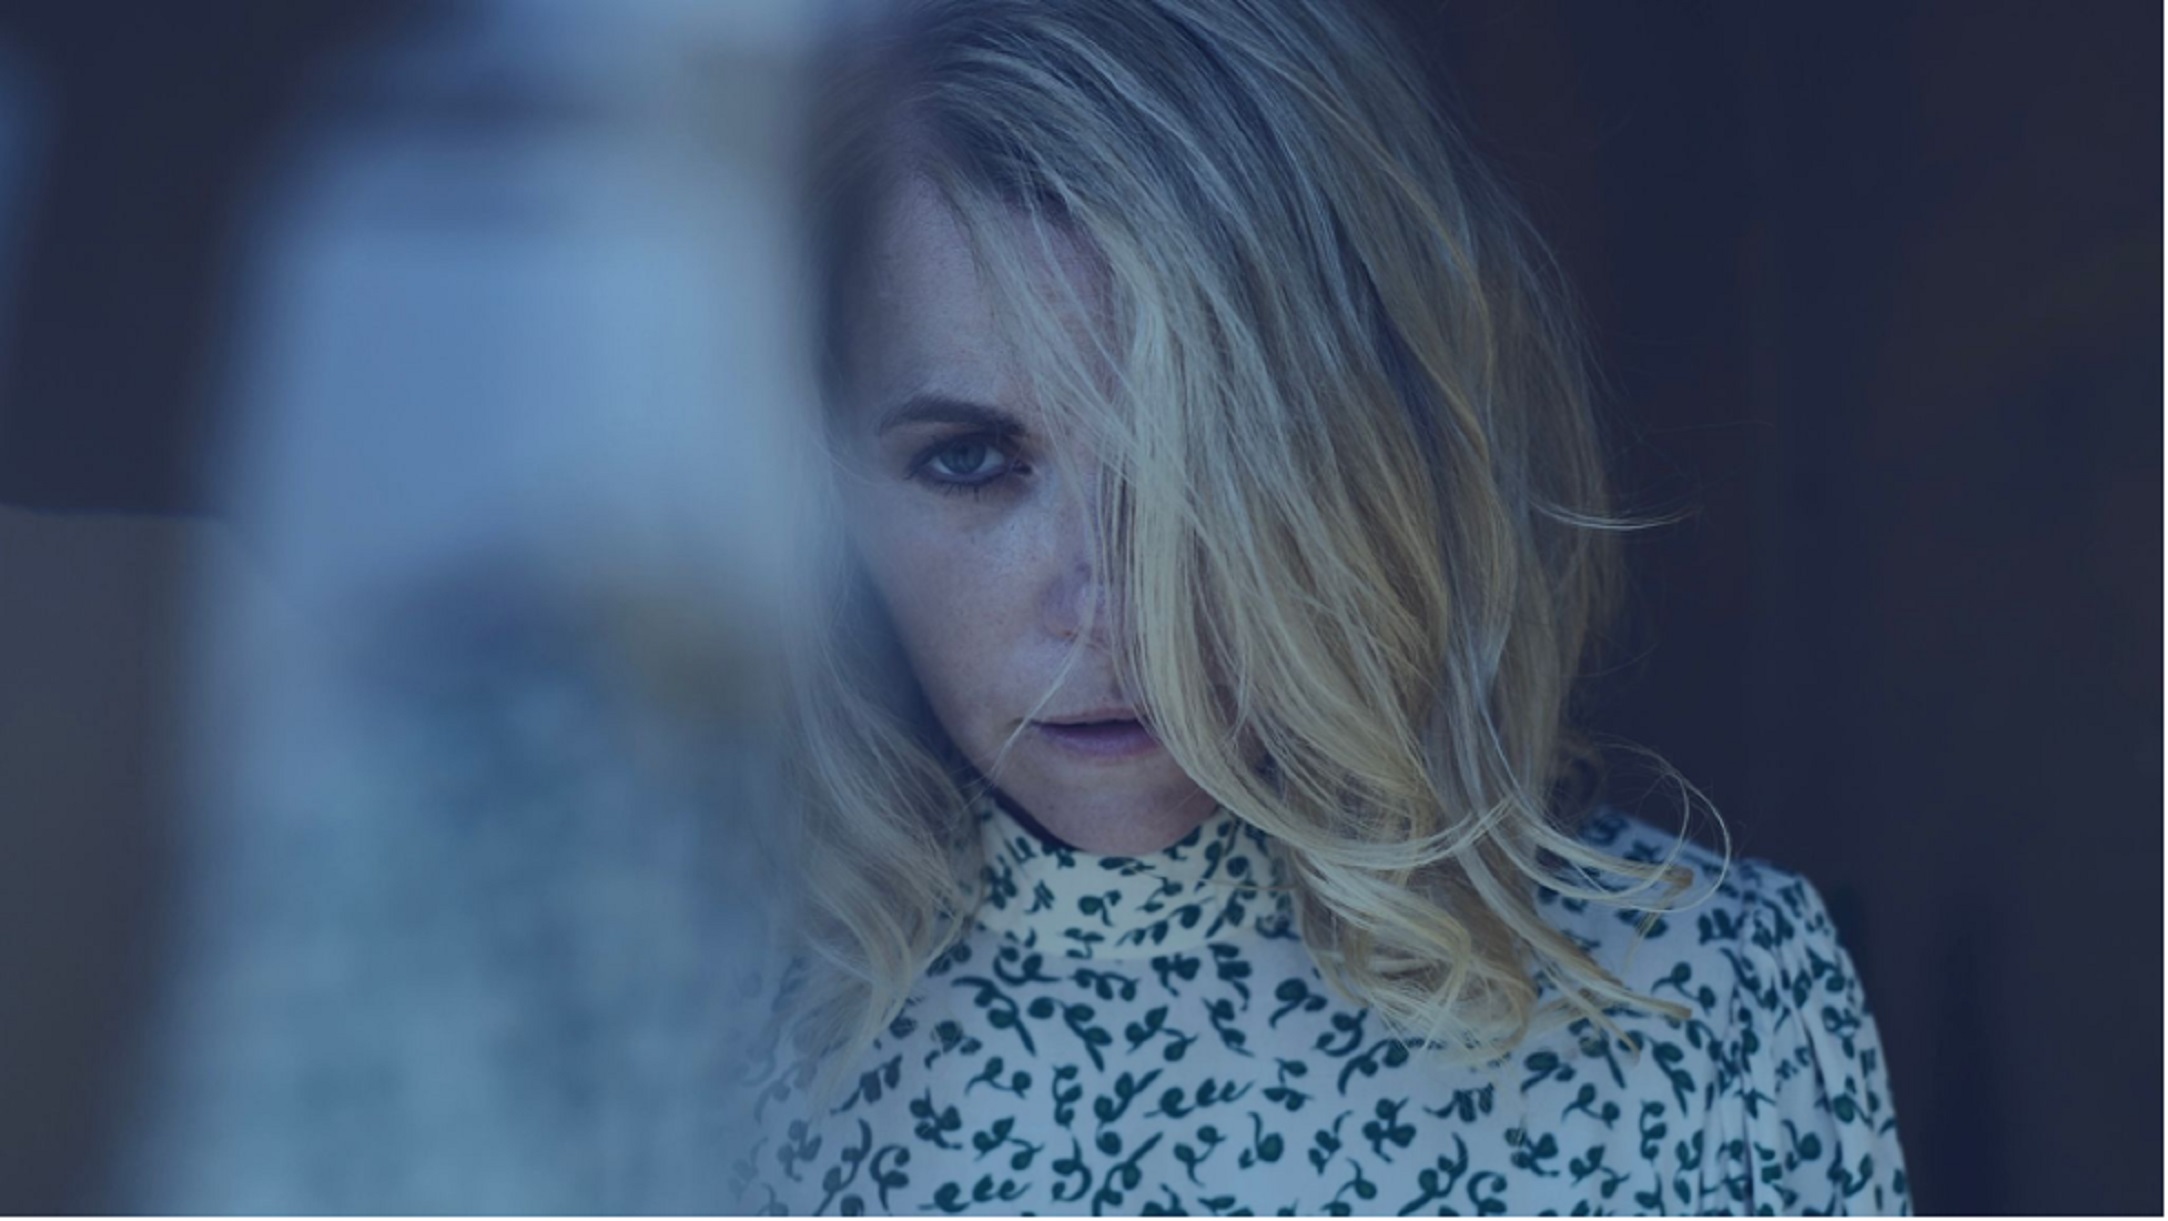 Aoife O’Donovan Shares Cover Of Sharon Van Etten’s “I Love You But I’m Lost”